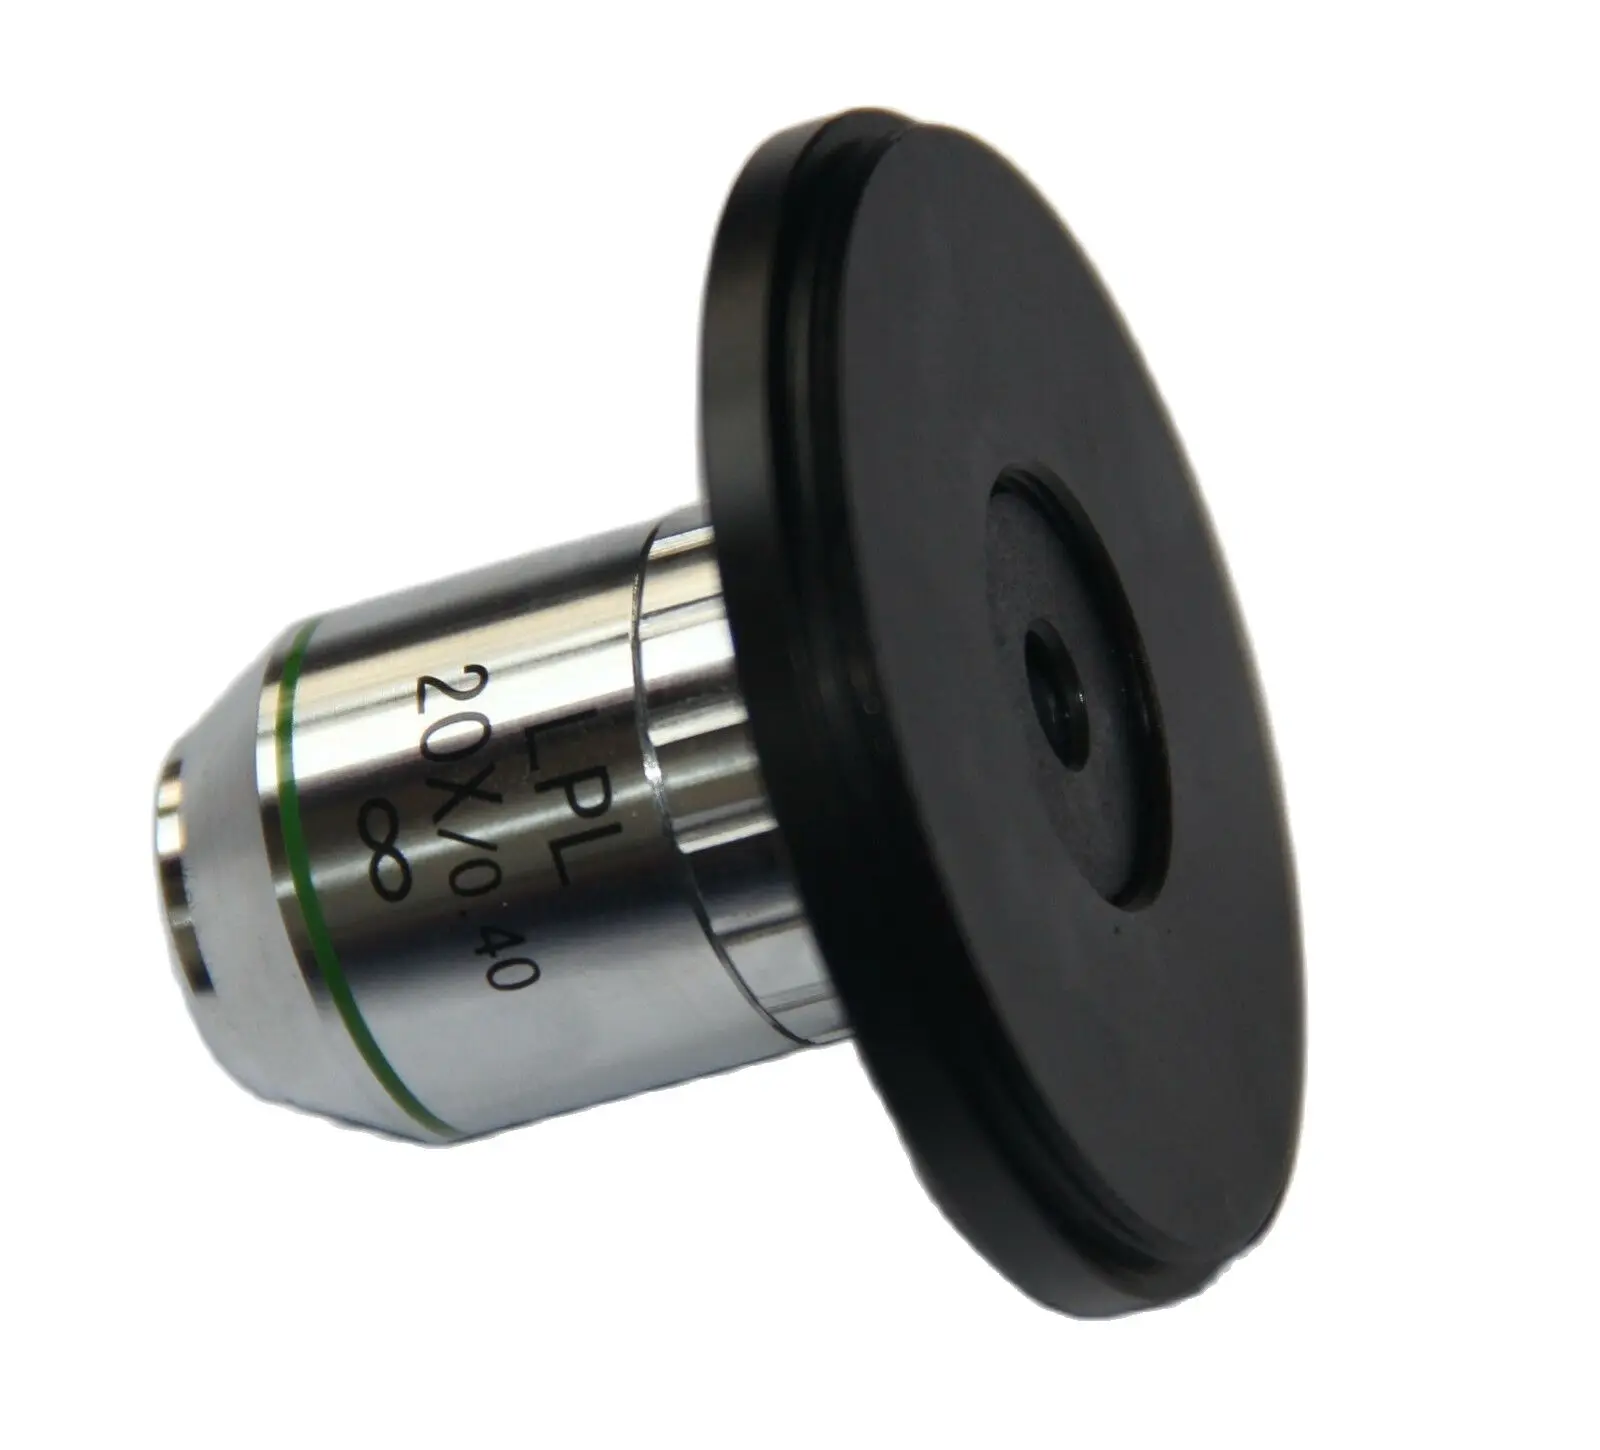 ProScope .8"X 36tpi RMS Thread for microscope objective to M52 52mm M49 49mm M39X1 LTM 39mm M42 Lens Adapter images - 6